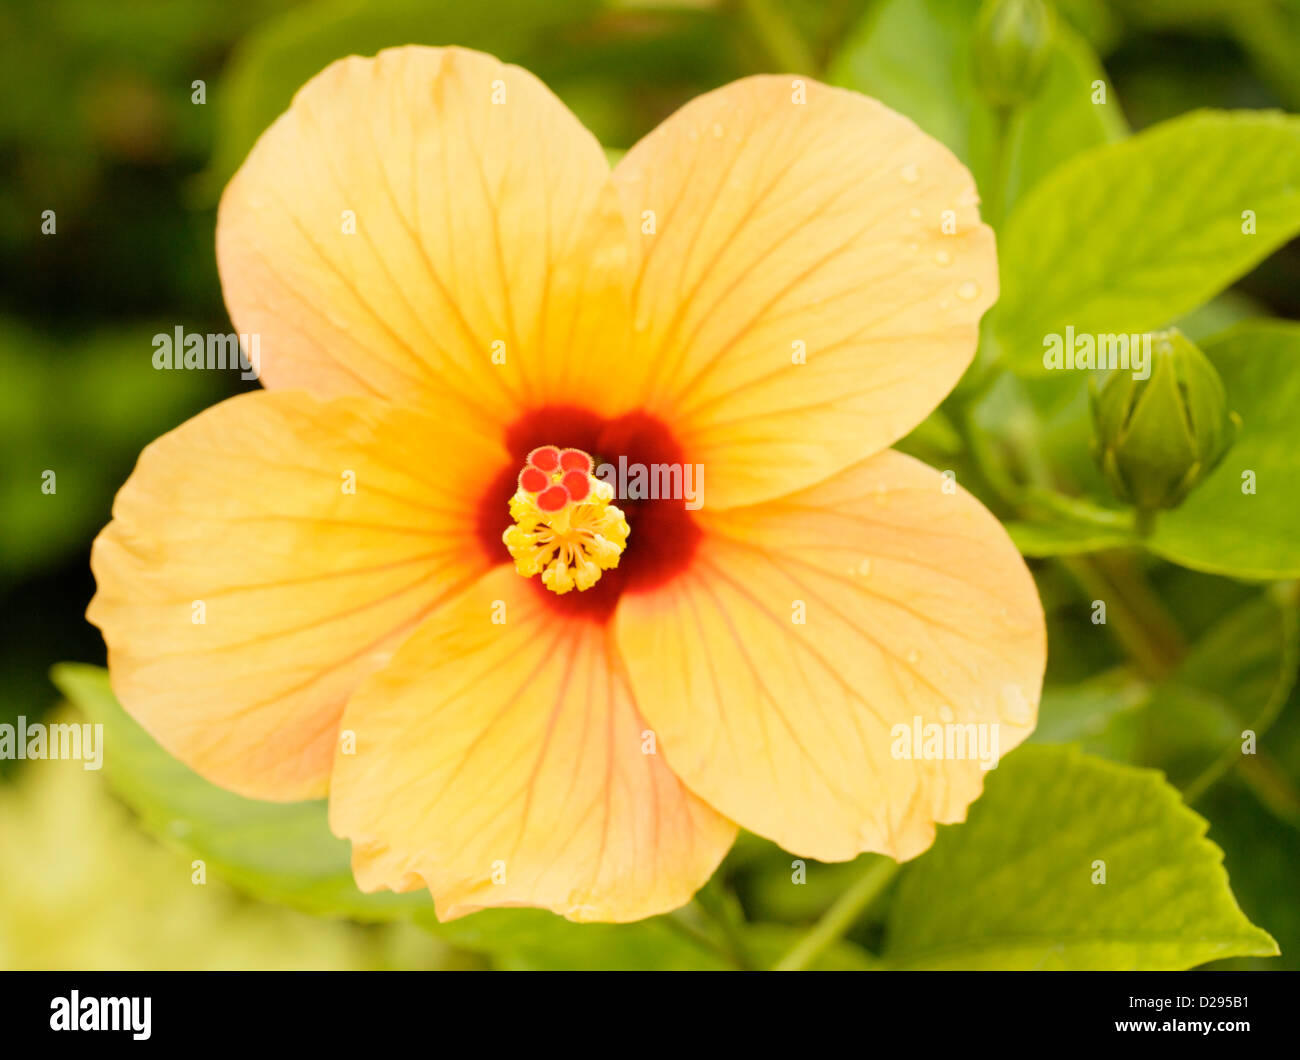 A yellow hibiscus flower which is part of the malvaceae family. Stock Photo